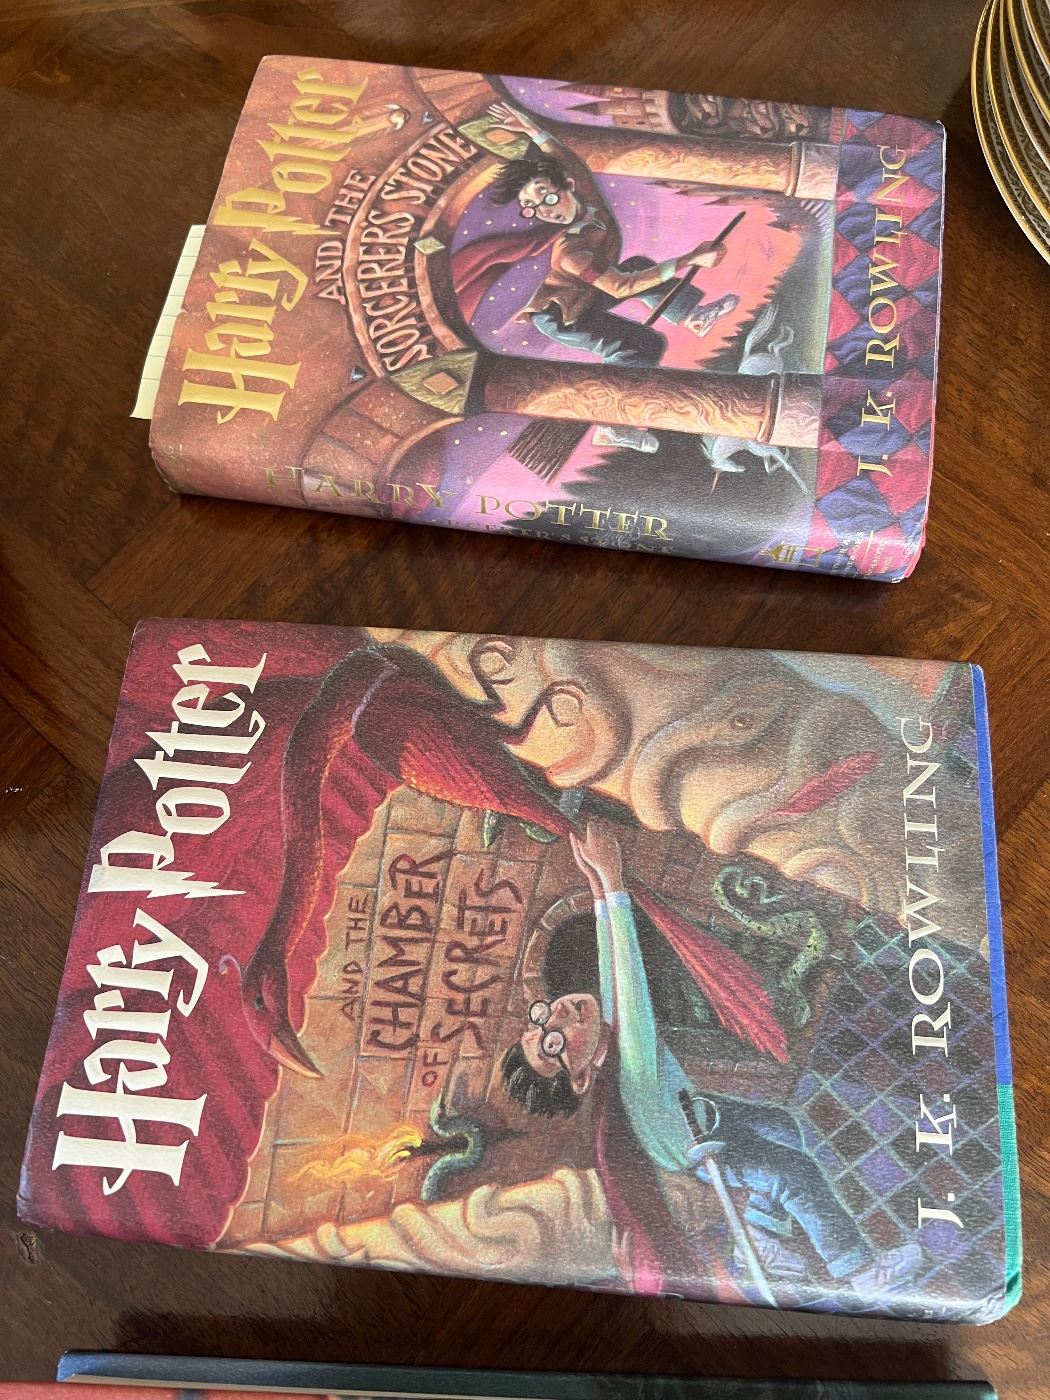 HARRY POTTER BOOKS some with Errors EXCELLENT CONDITION!